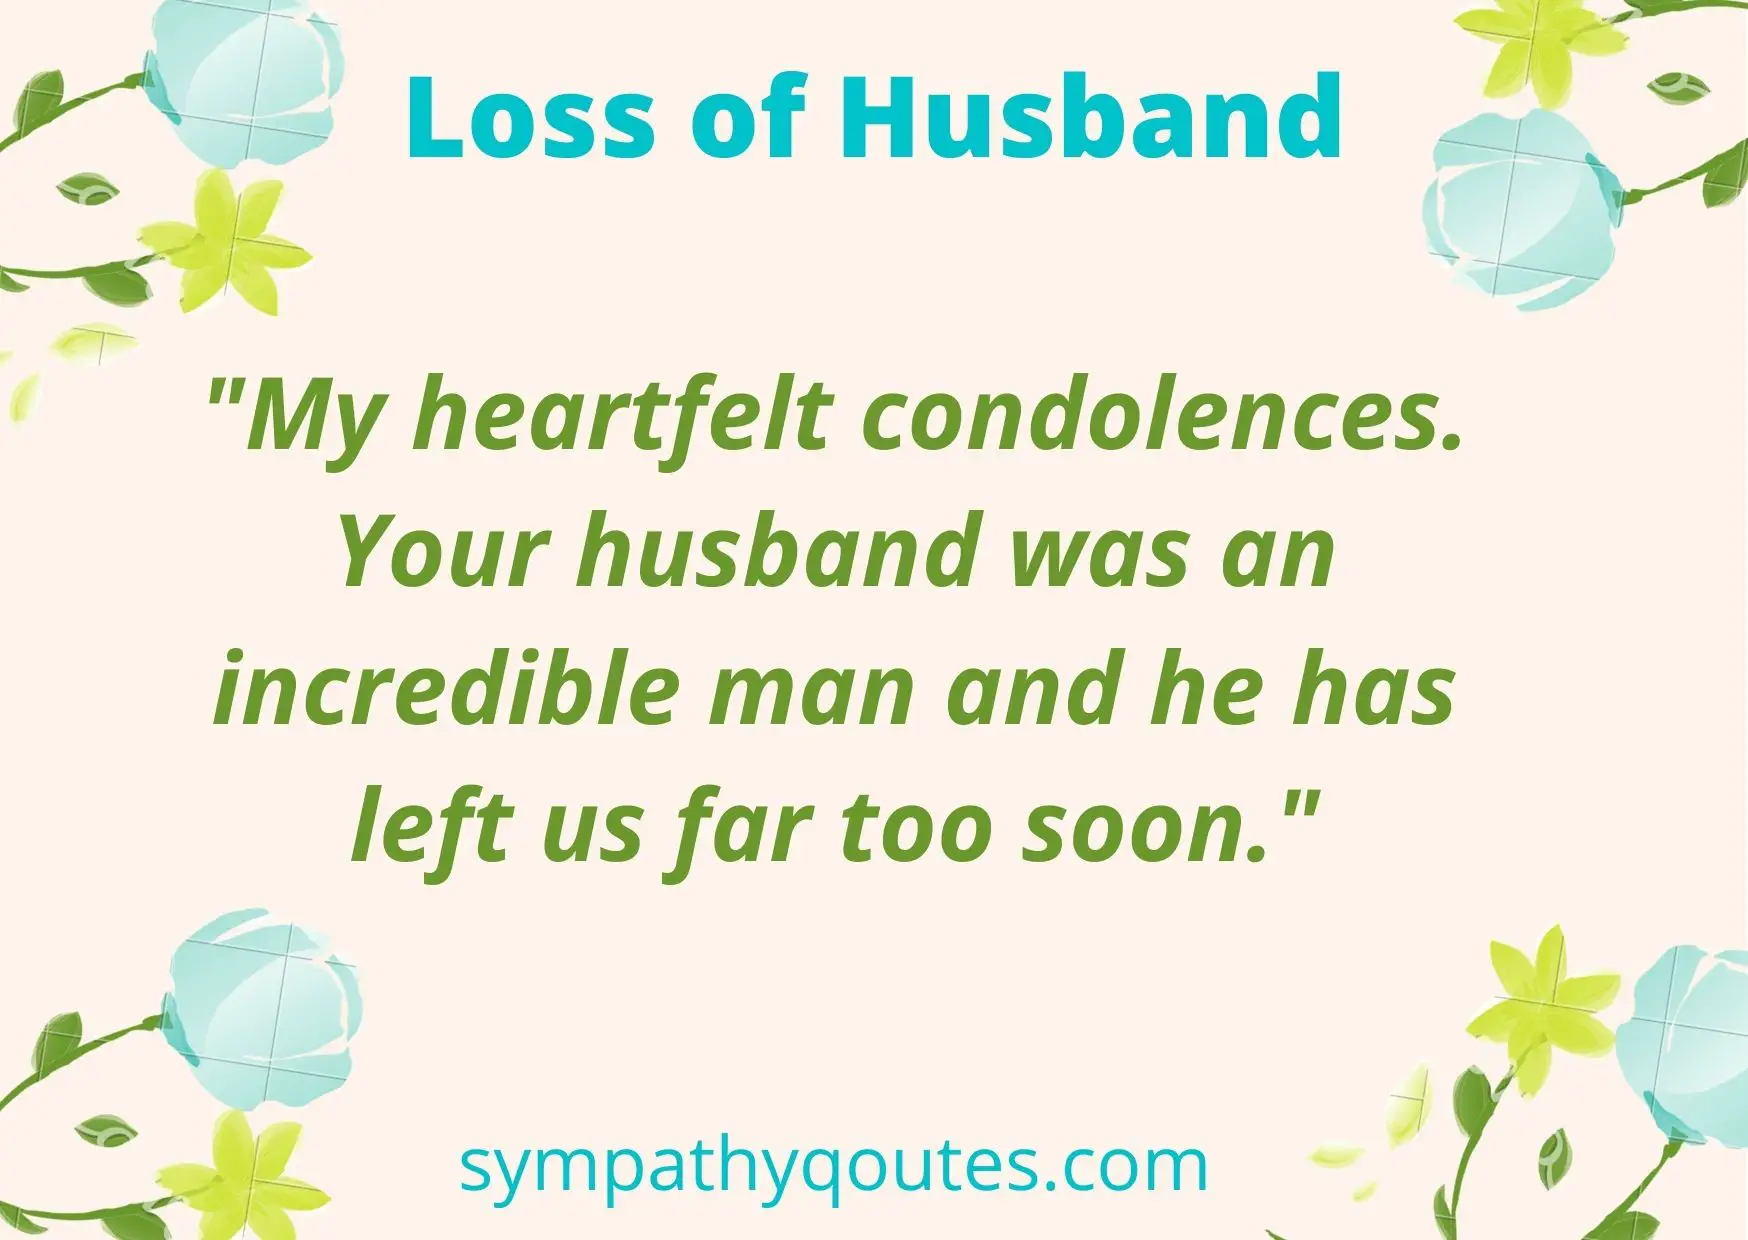  Condolence Messages for Loss of Husband